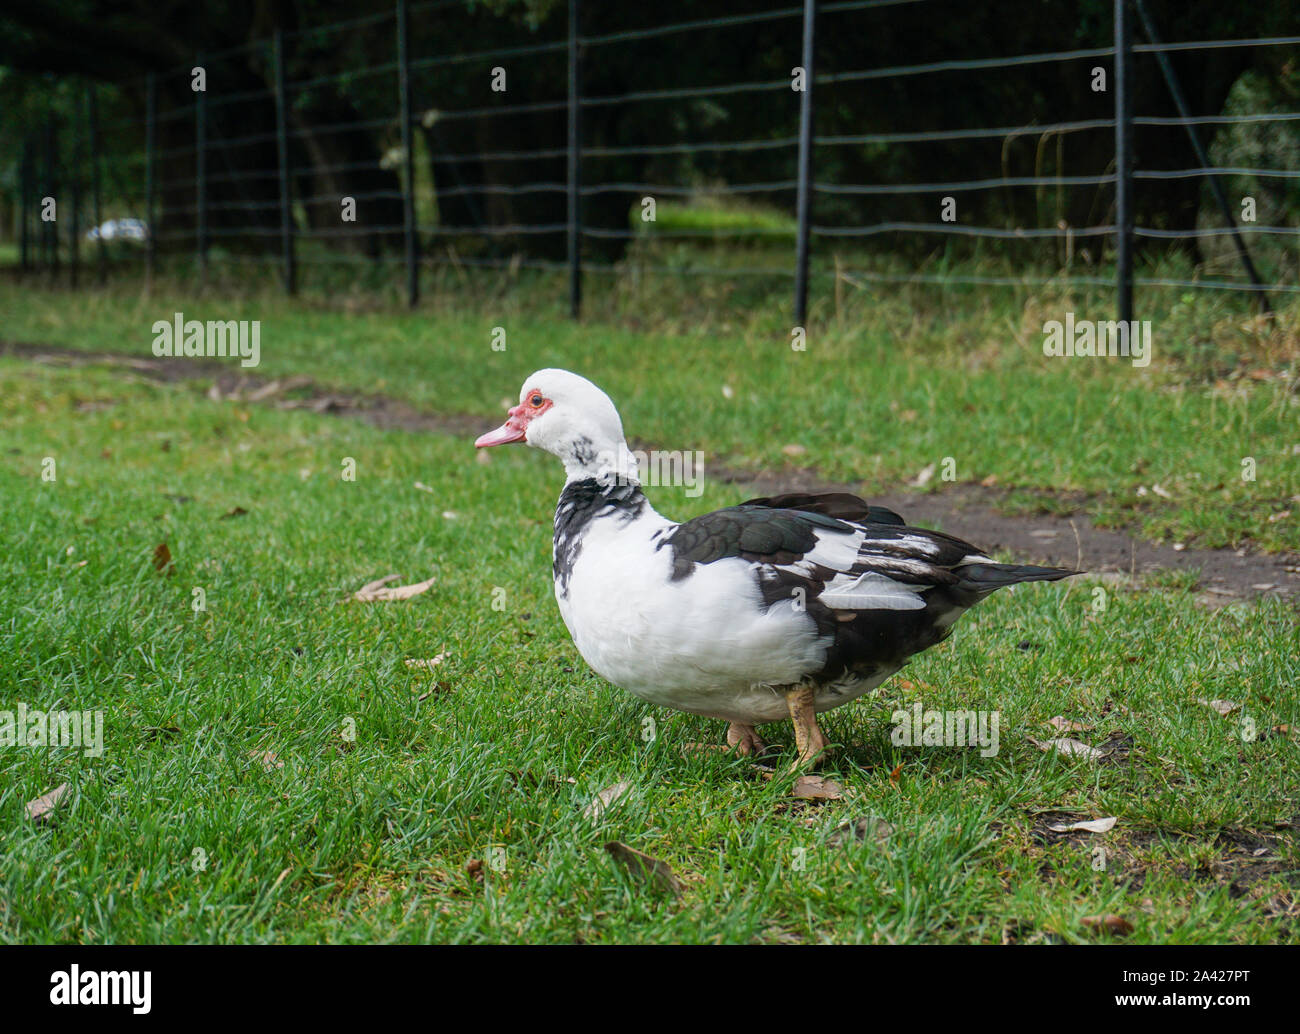 A muscovy duck searching grass for food. Stock Photo